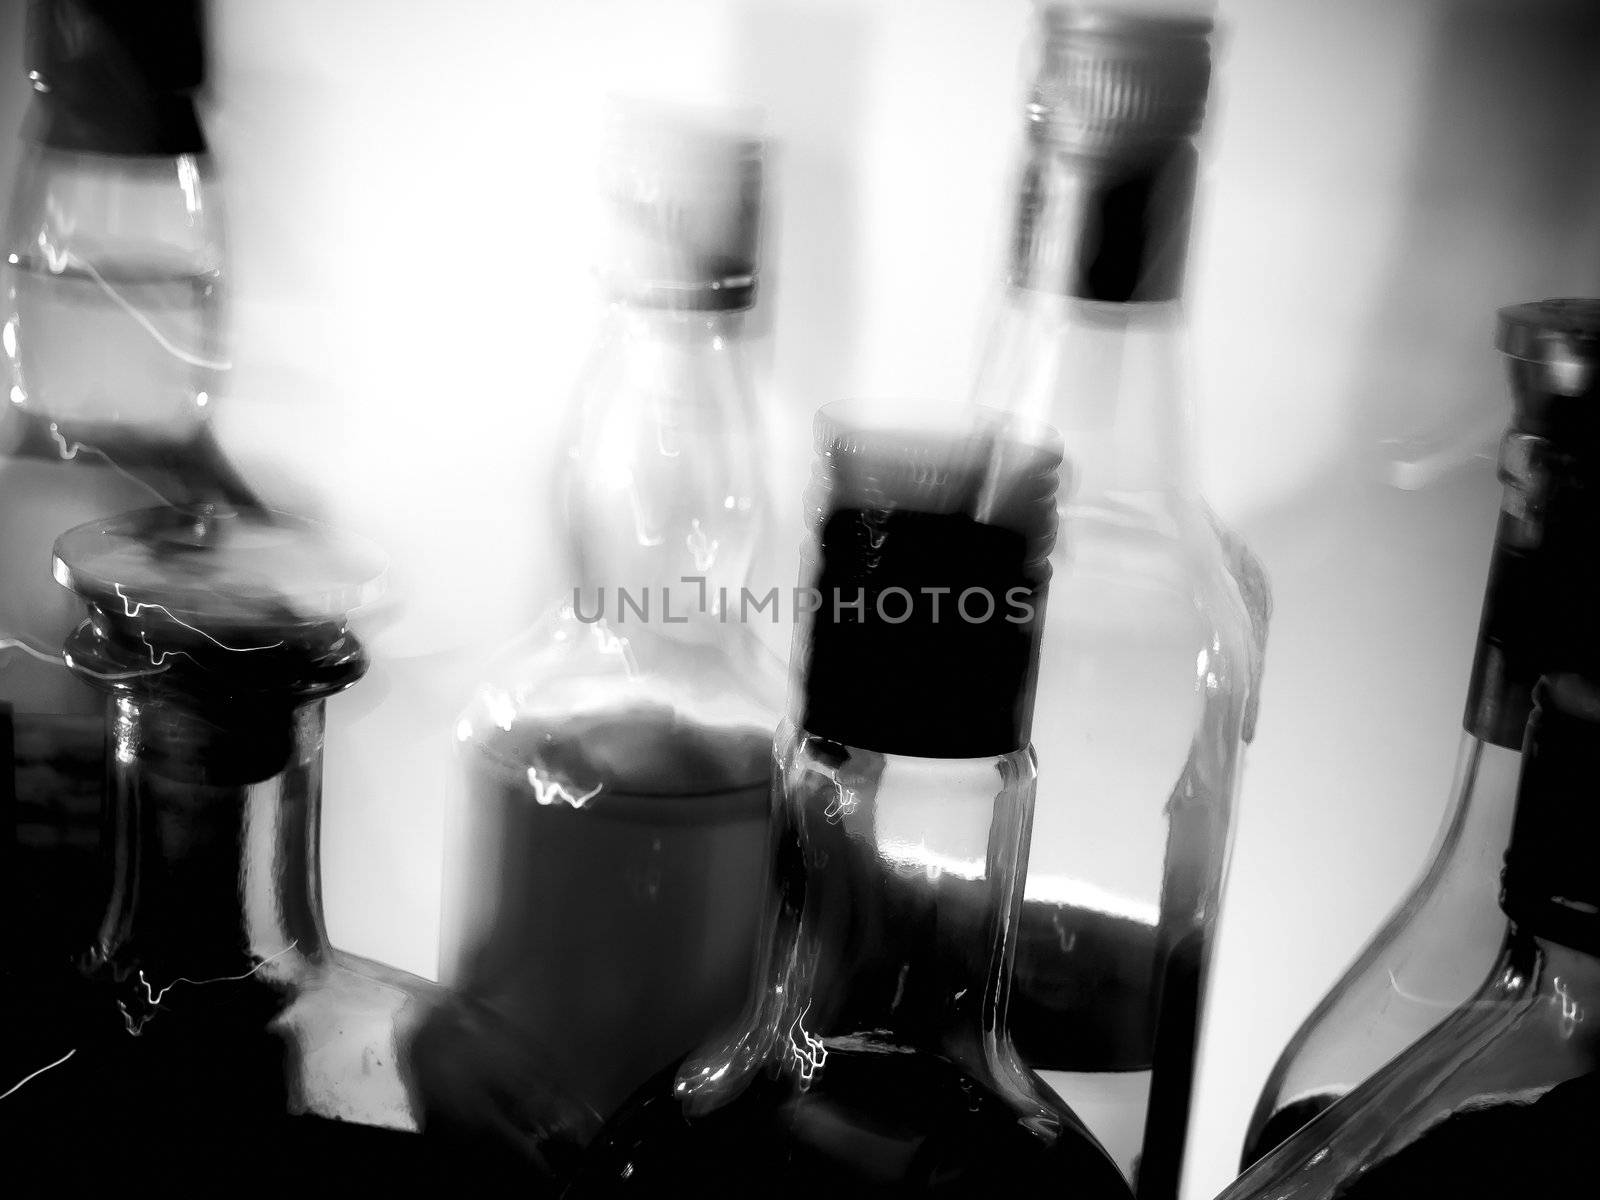 Various bottles at a bar, black and white, high contrast